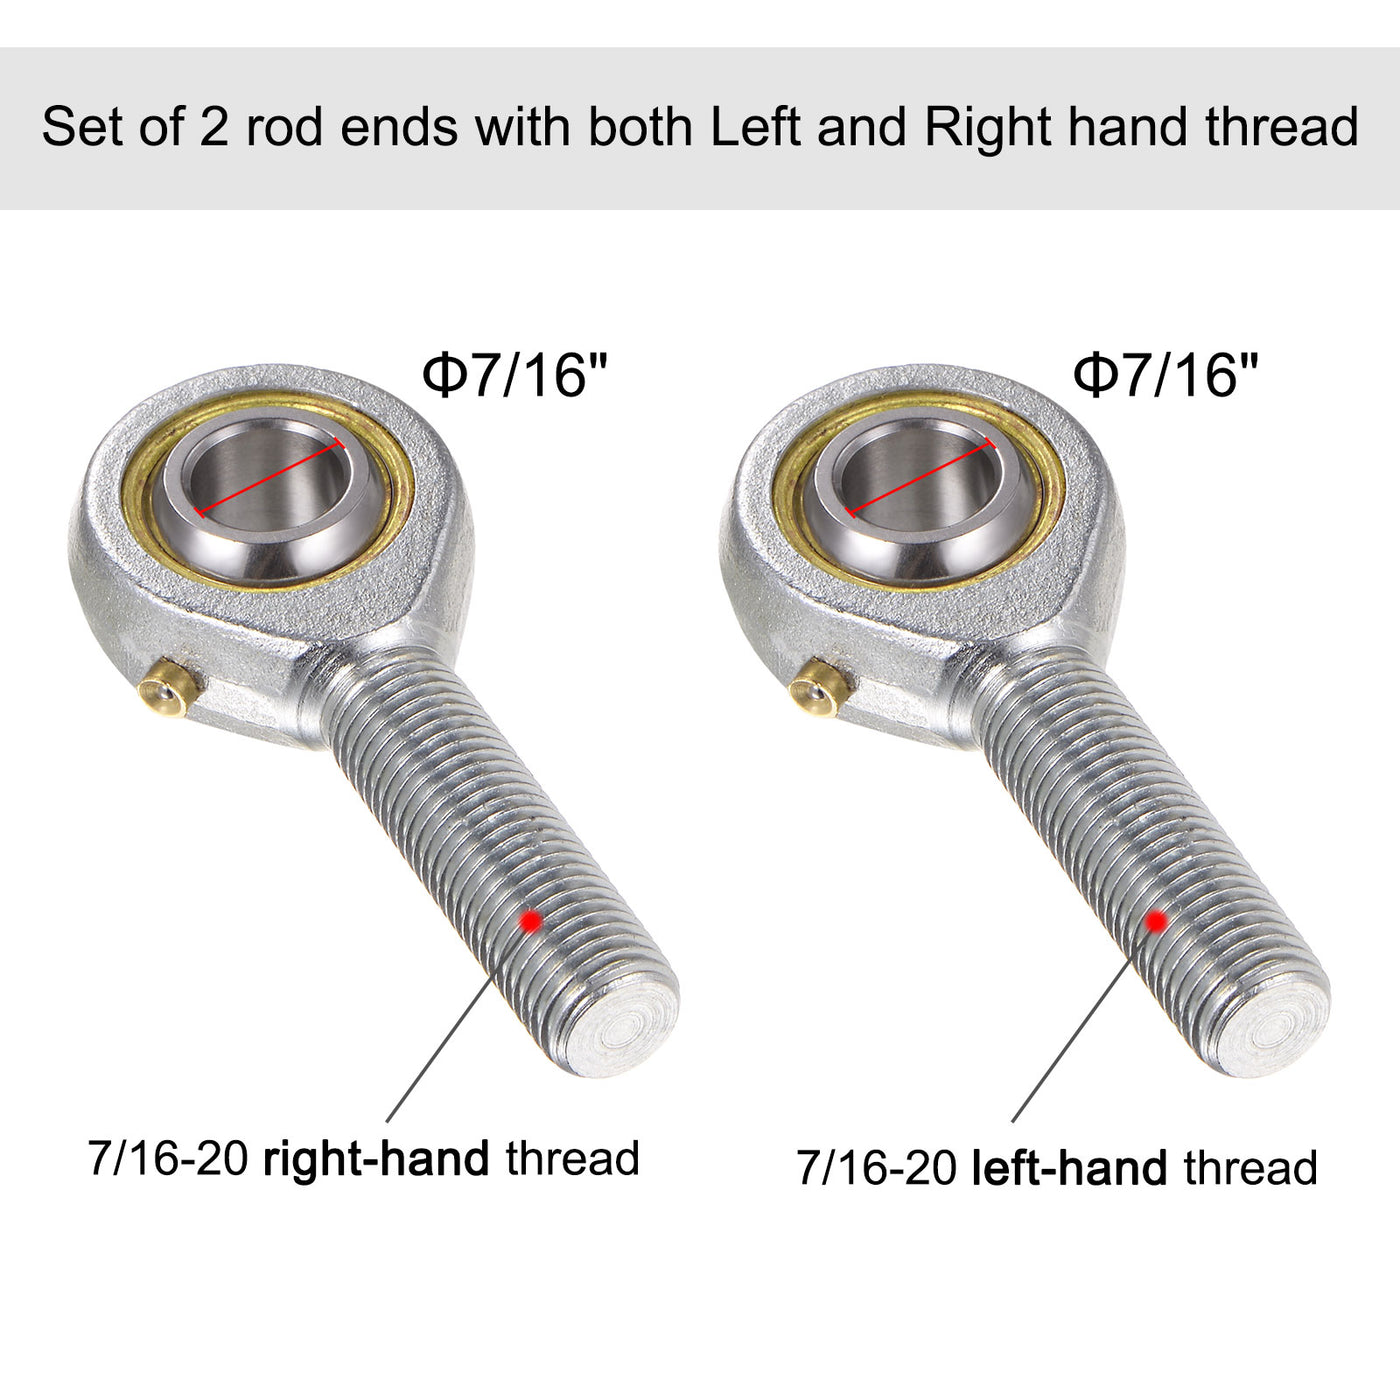 uxcell Uxcell POSB7 7/16" Male Rod End Set - 2pcs of 7/16-20 Left & Right Thread with Jam Nut